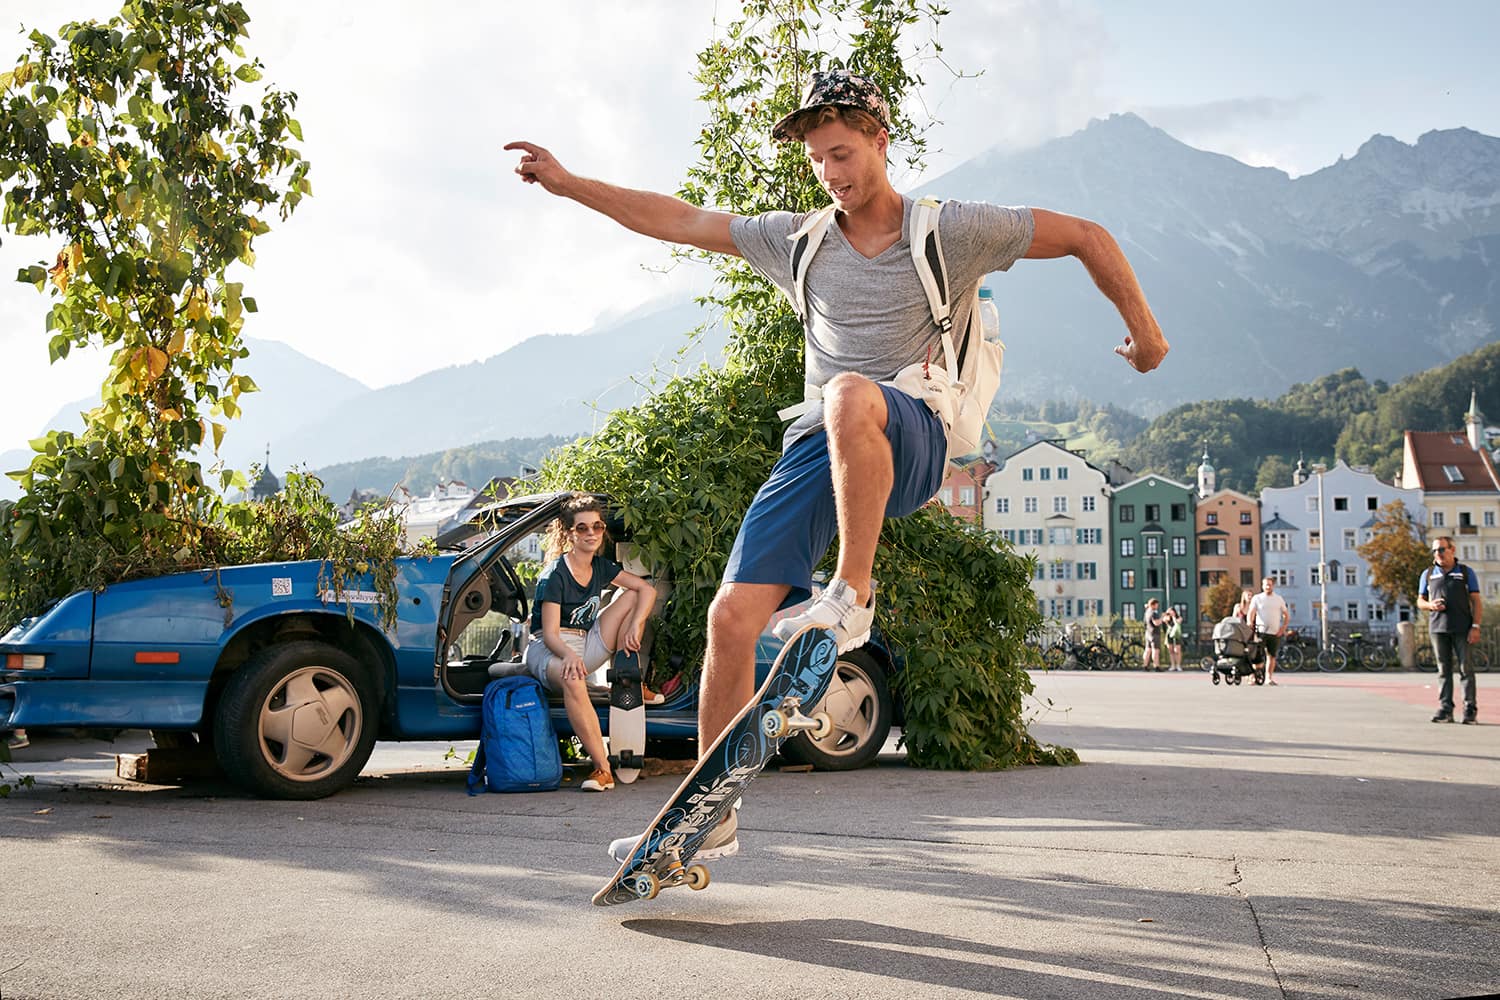 Boy doing skateboard tricks infront of his girlfriend in a plant car on the marketplace of Innsbruck